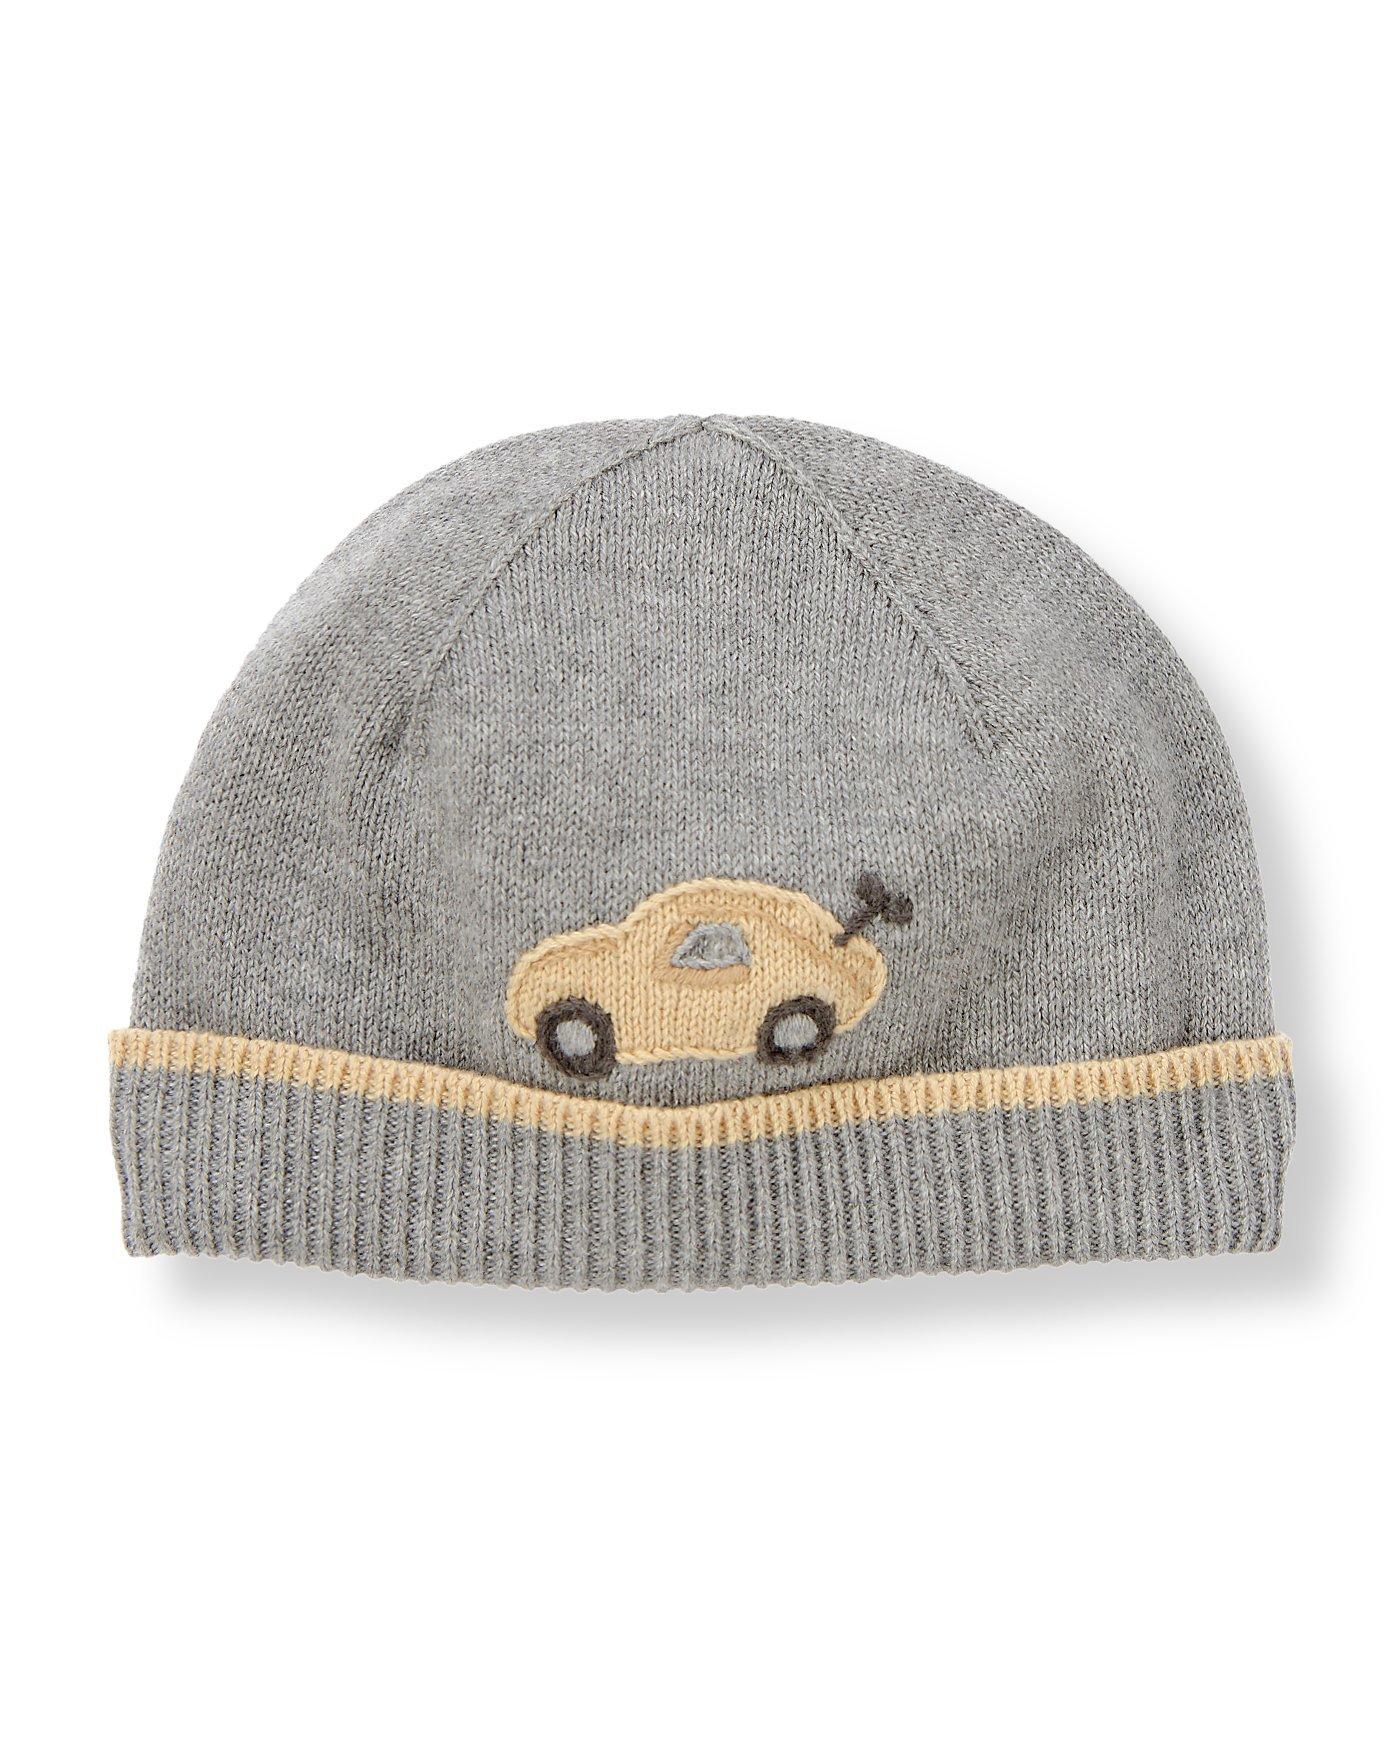 Toy Car Sweater Beanie image number 0